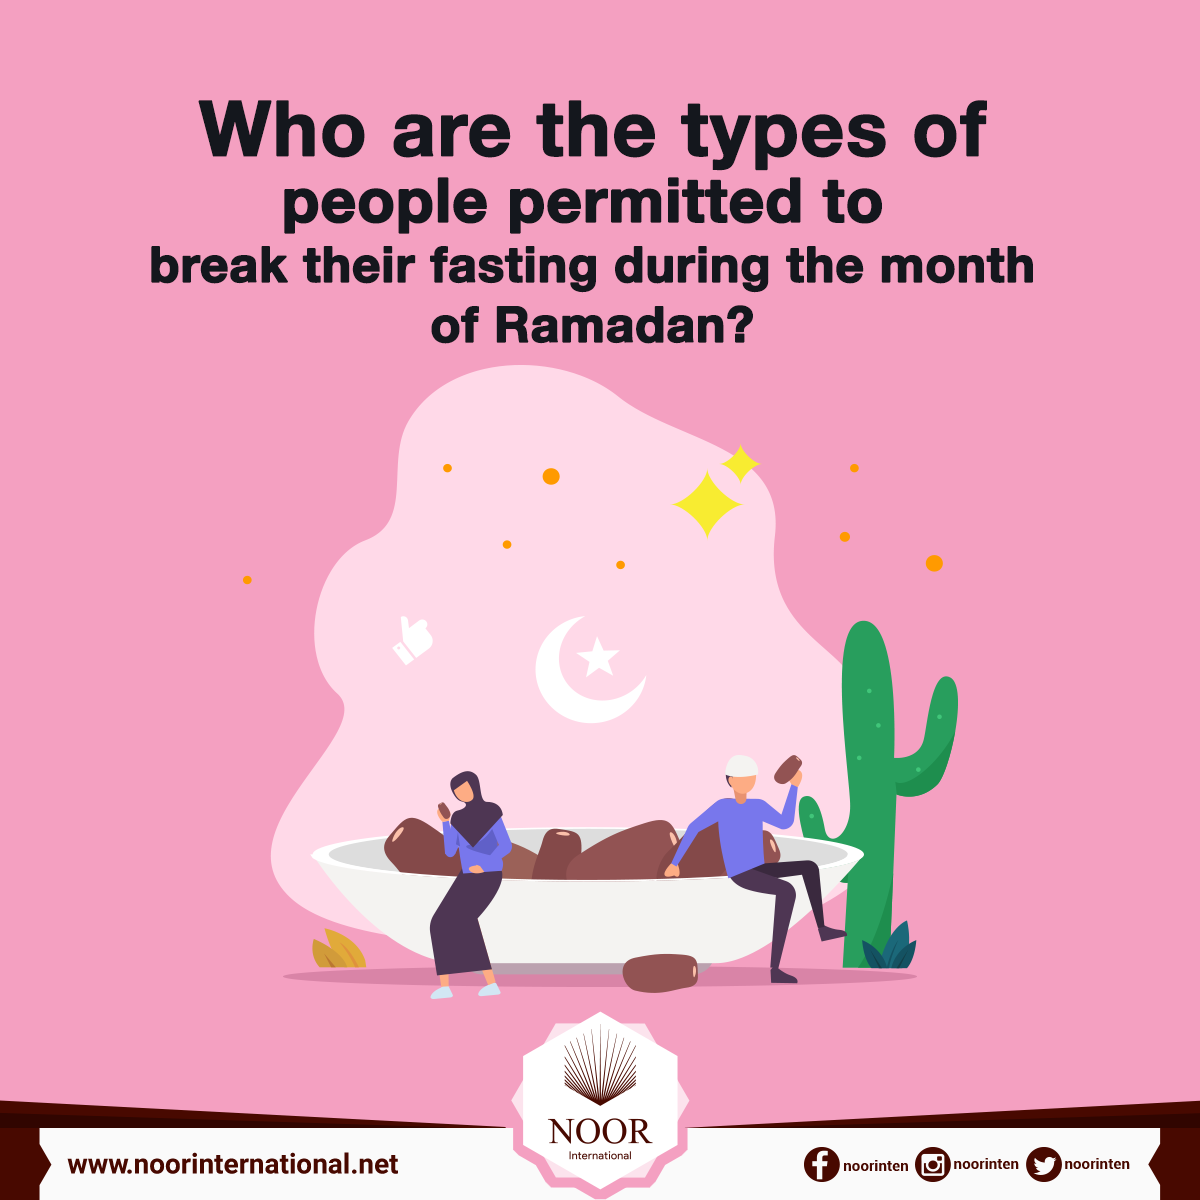 Who are the types of people permitted to break their fasting during the month of Ramadan?